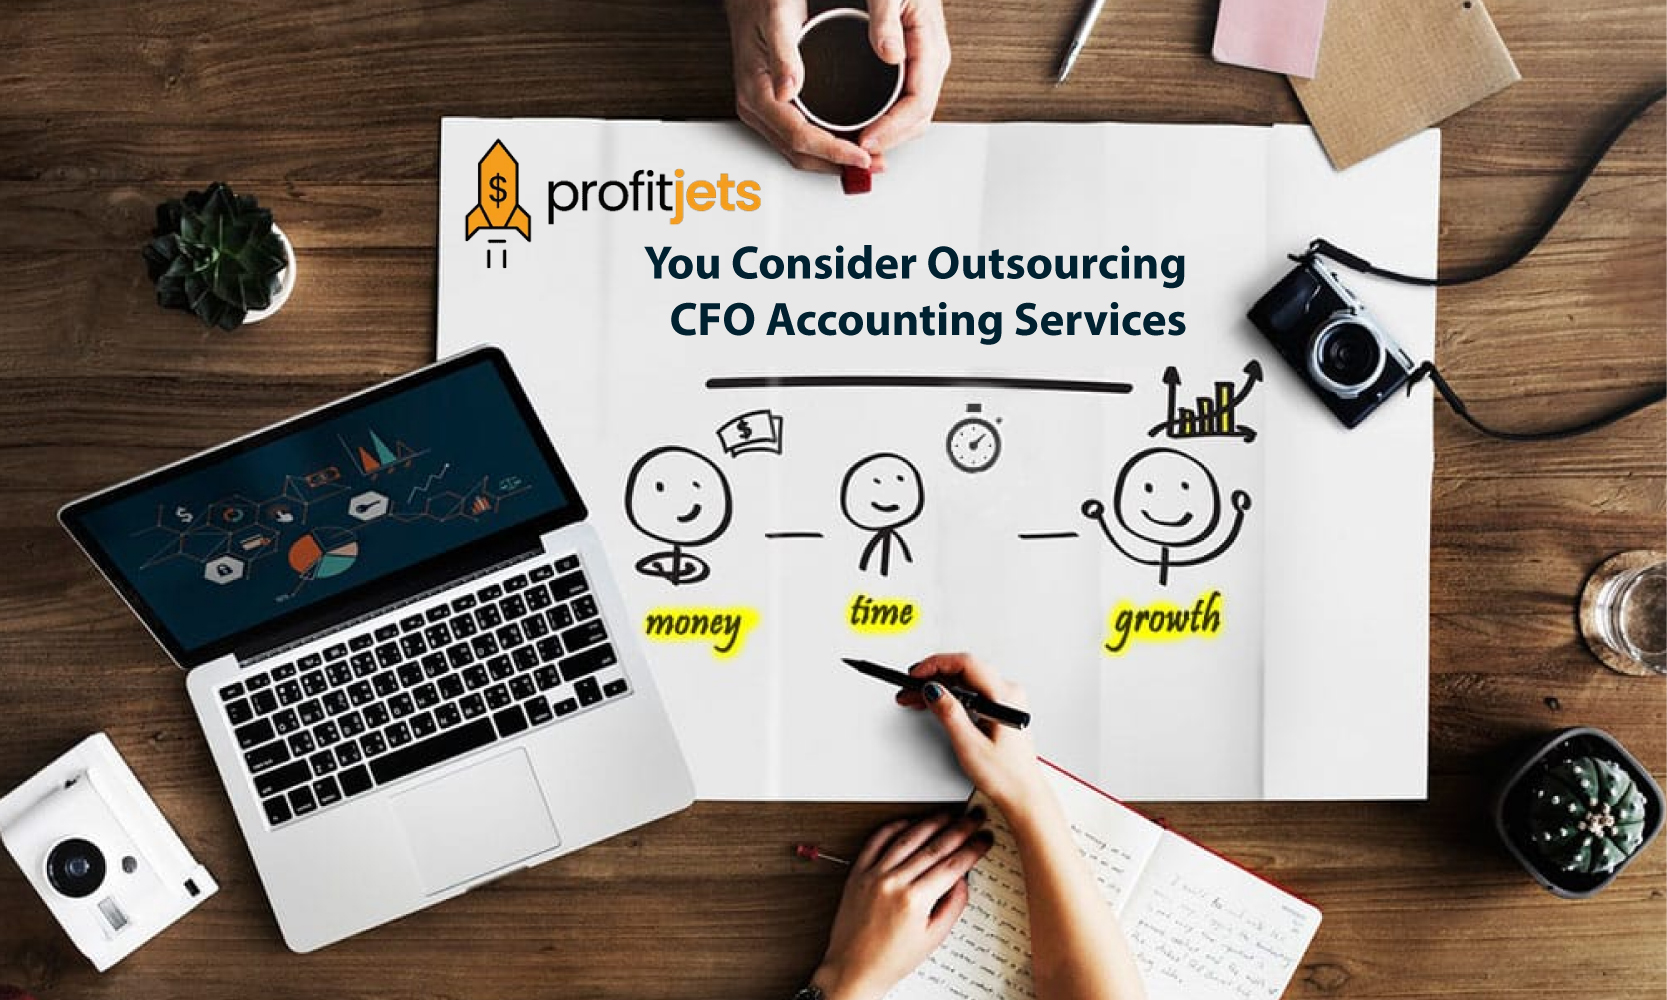 Why Should You Consider Outsourcing CFO Accounting Services